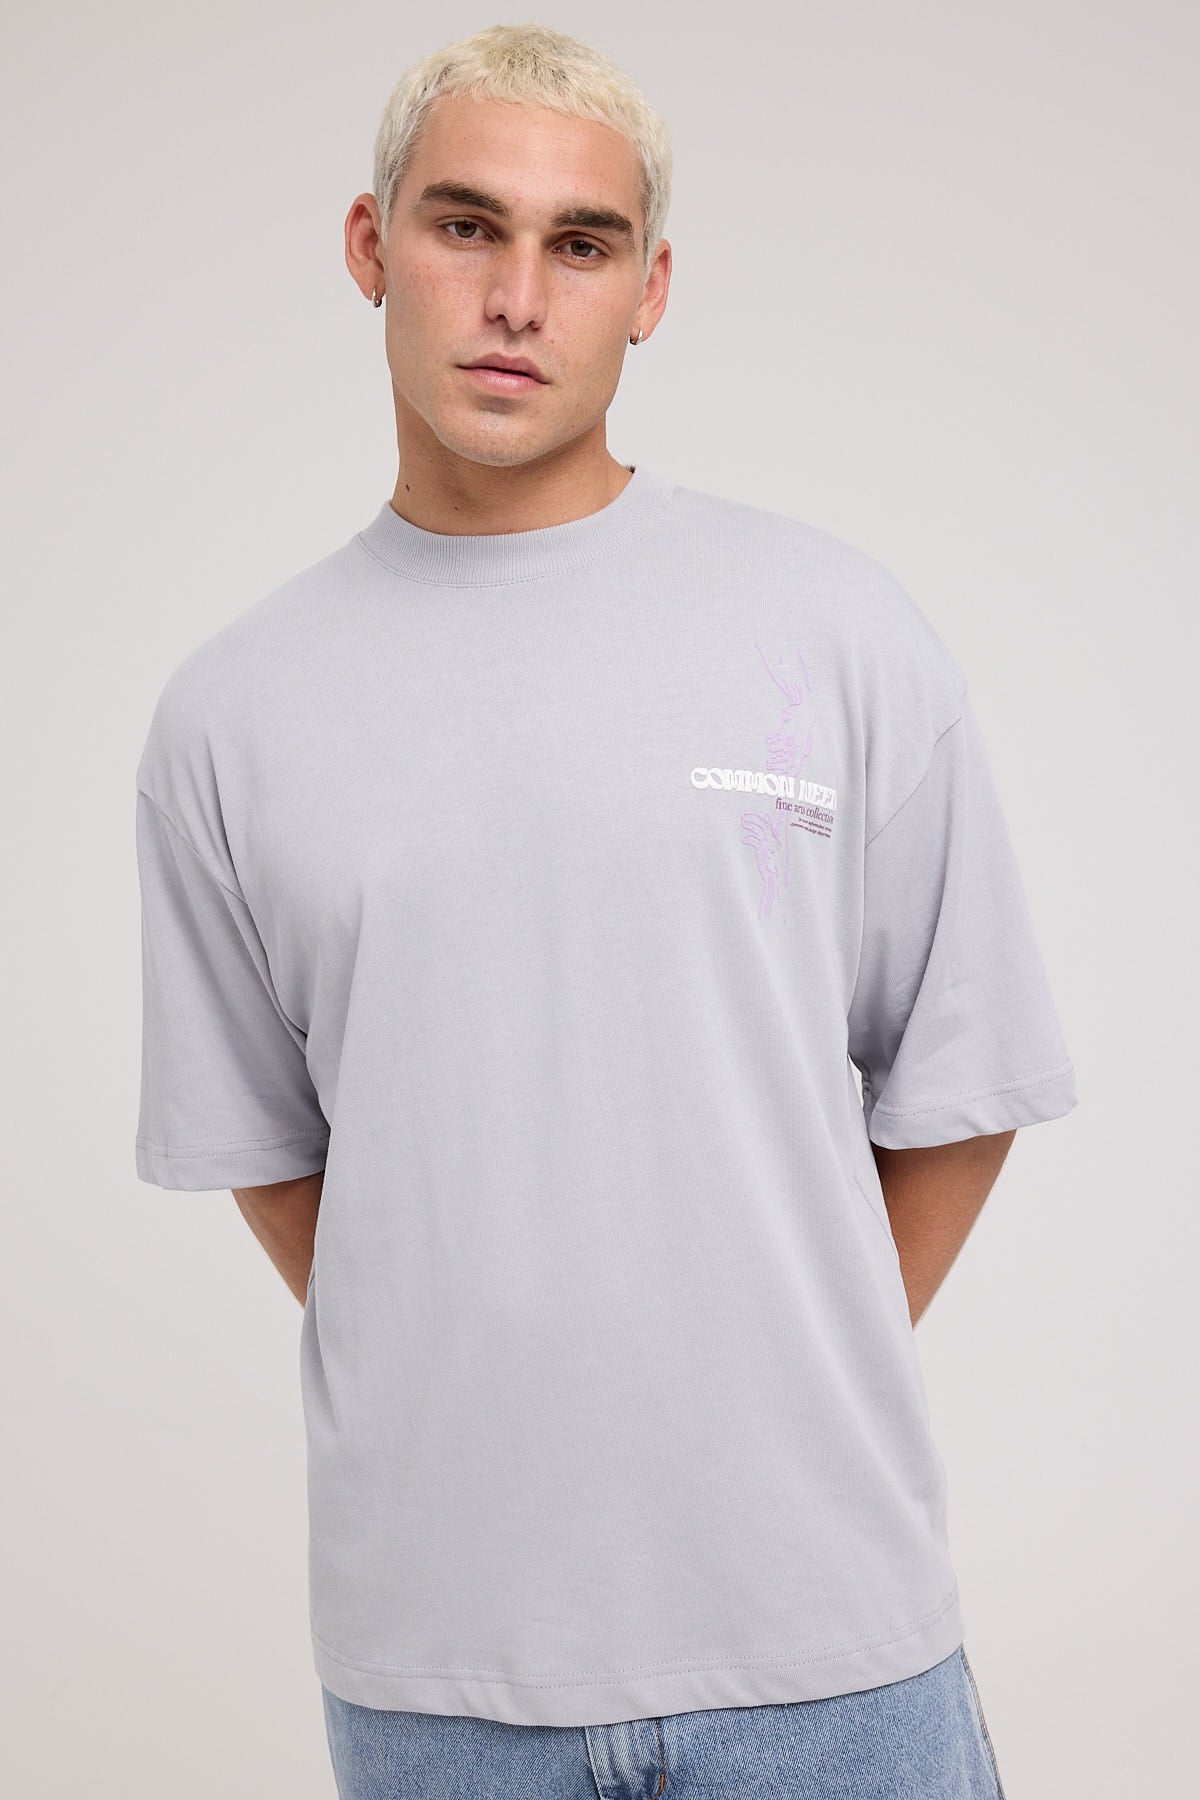 Common Need Touch The Sky Easy Tee Grey